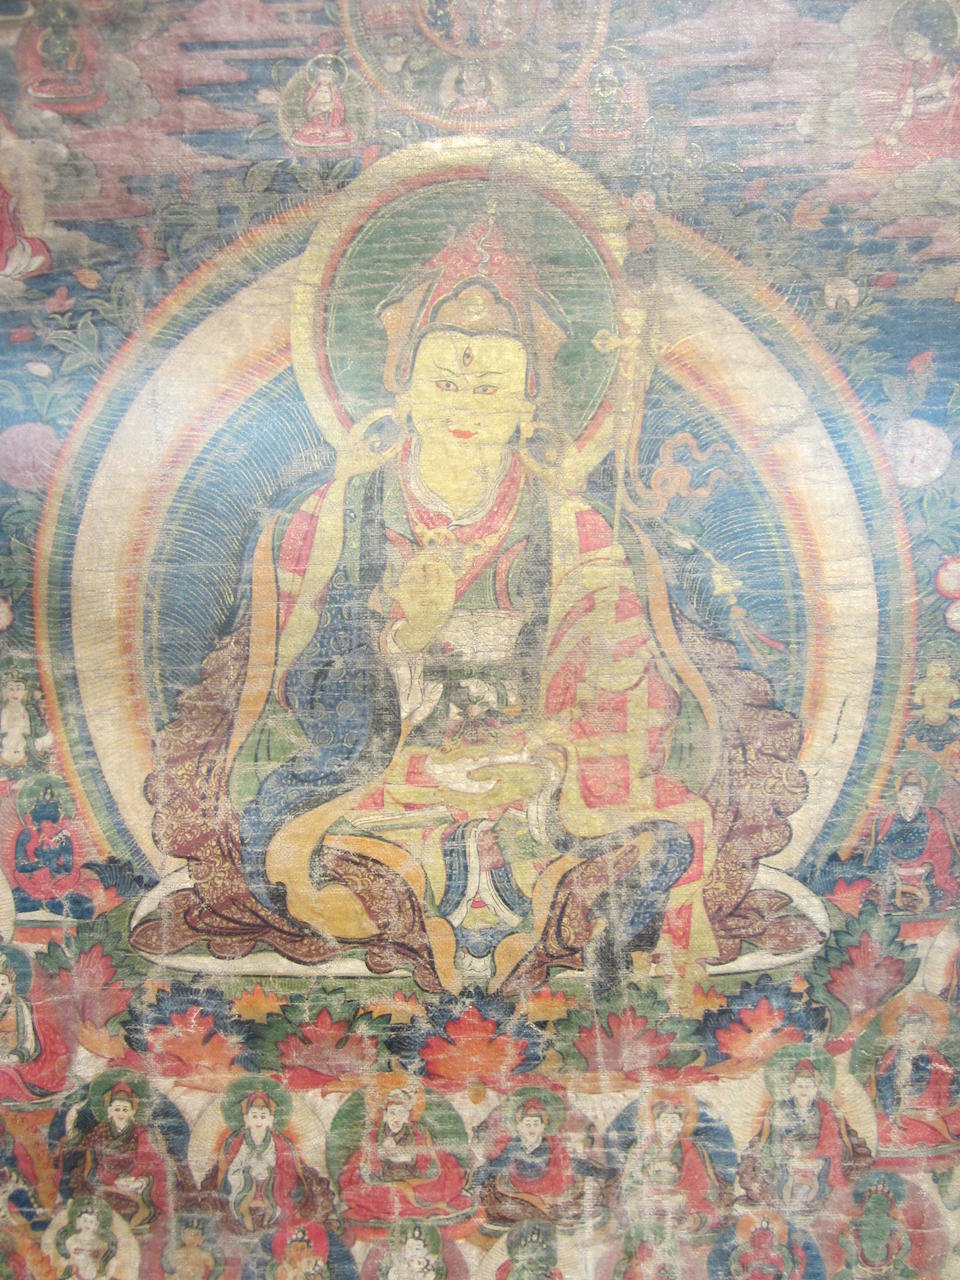 A THANGKA OF A NYINGMA REFUGE FIELD  Tibet, 19th century